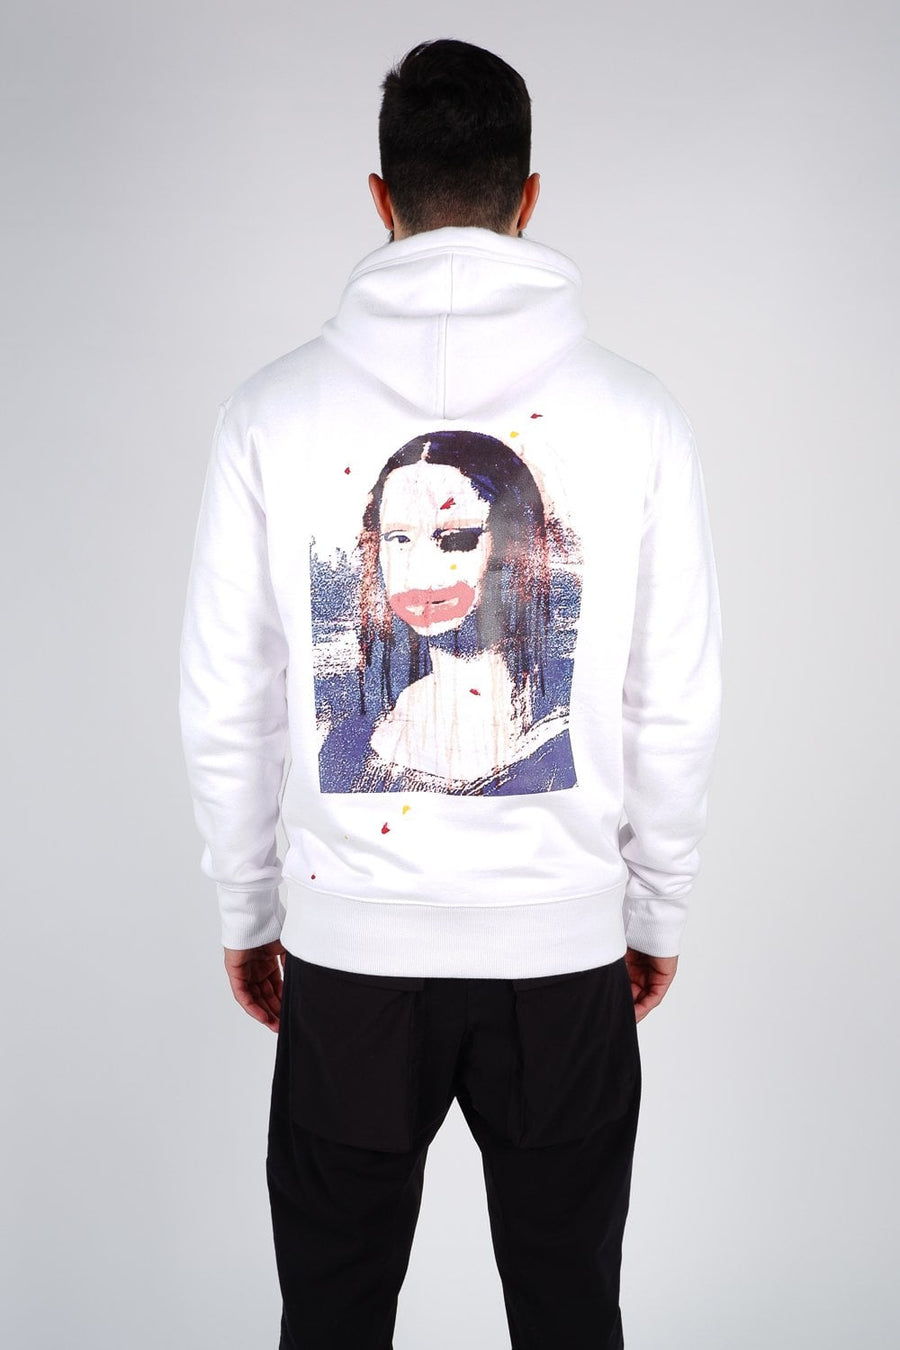 Buy the ABE Revenge Hoodie in White at Intro. Spend £50 for free UK delivery. Official stockists. We ship worldwide.